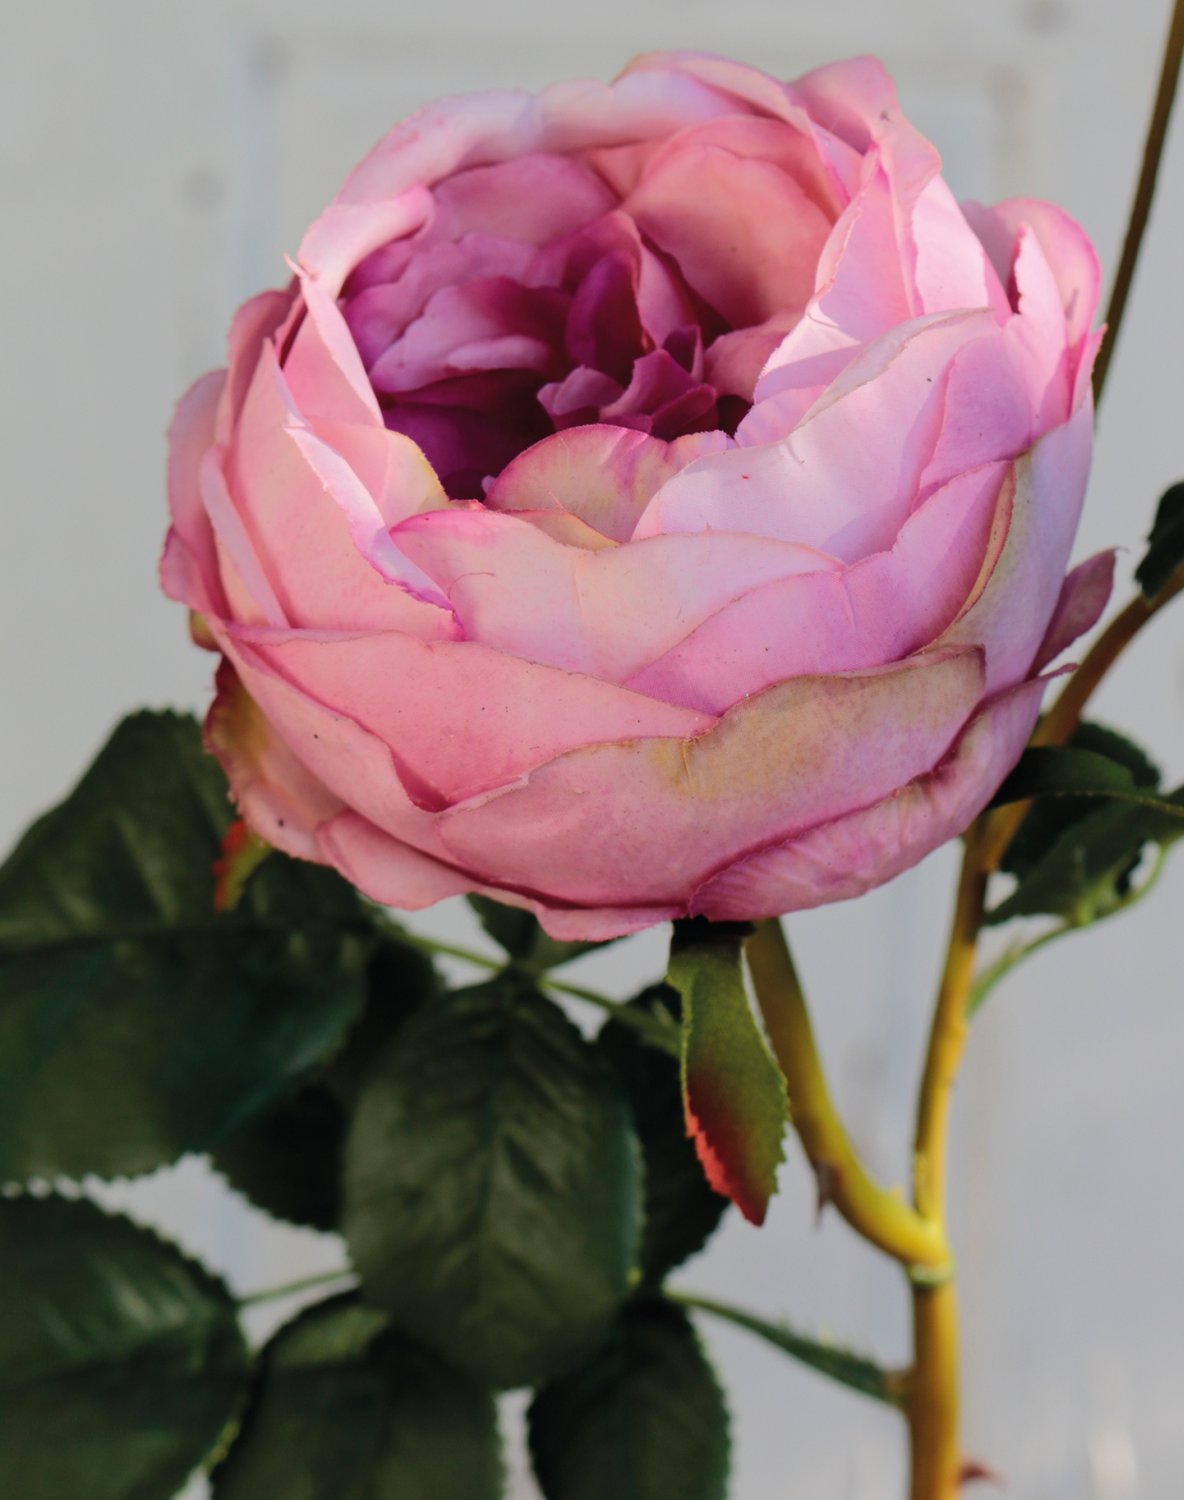 Artificial rose, 1 flower, 2 buds, 60 cm, real touch soft, antique-rose